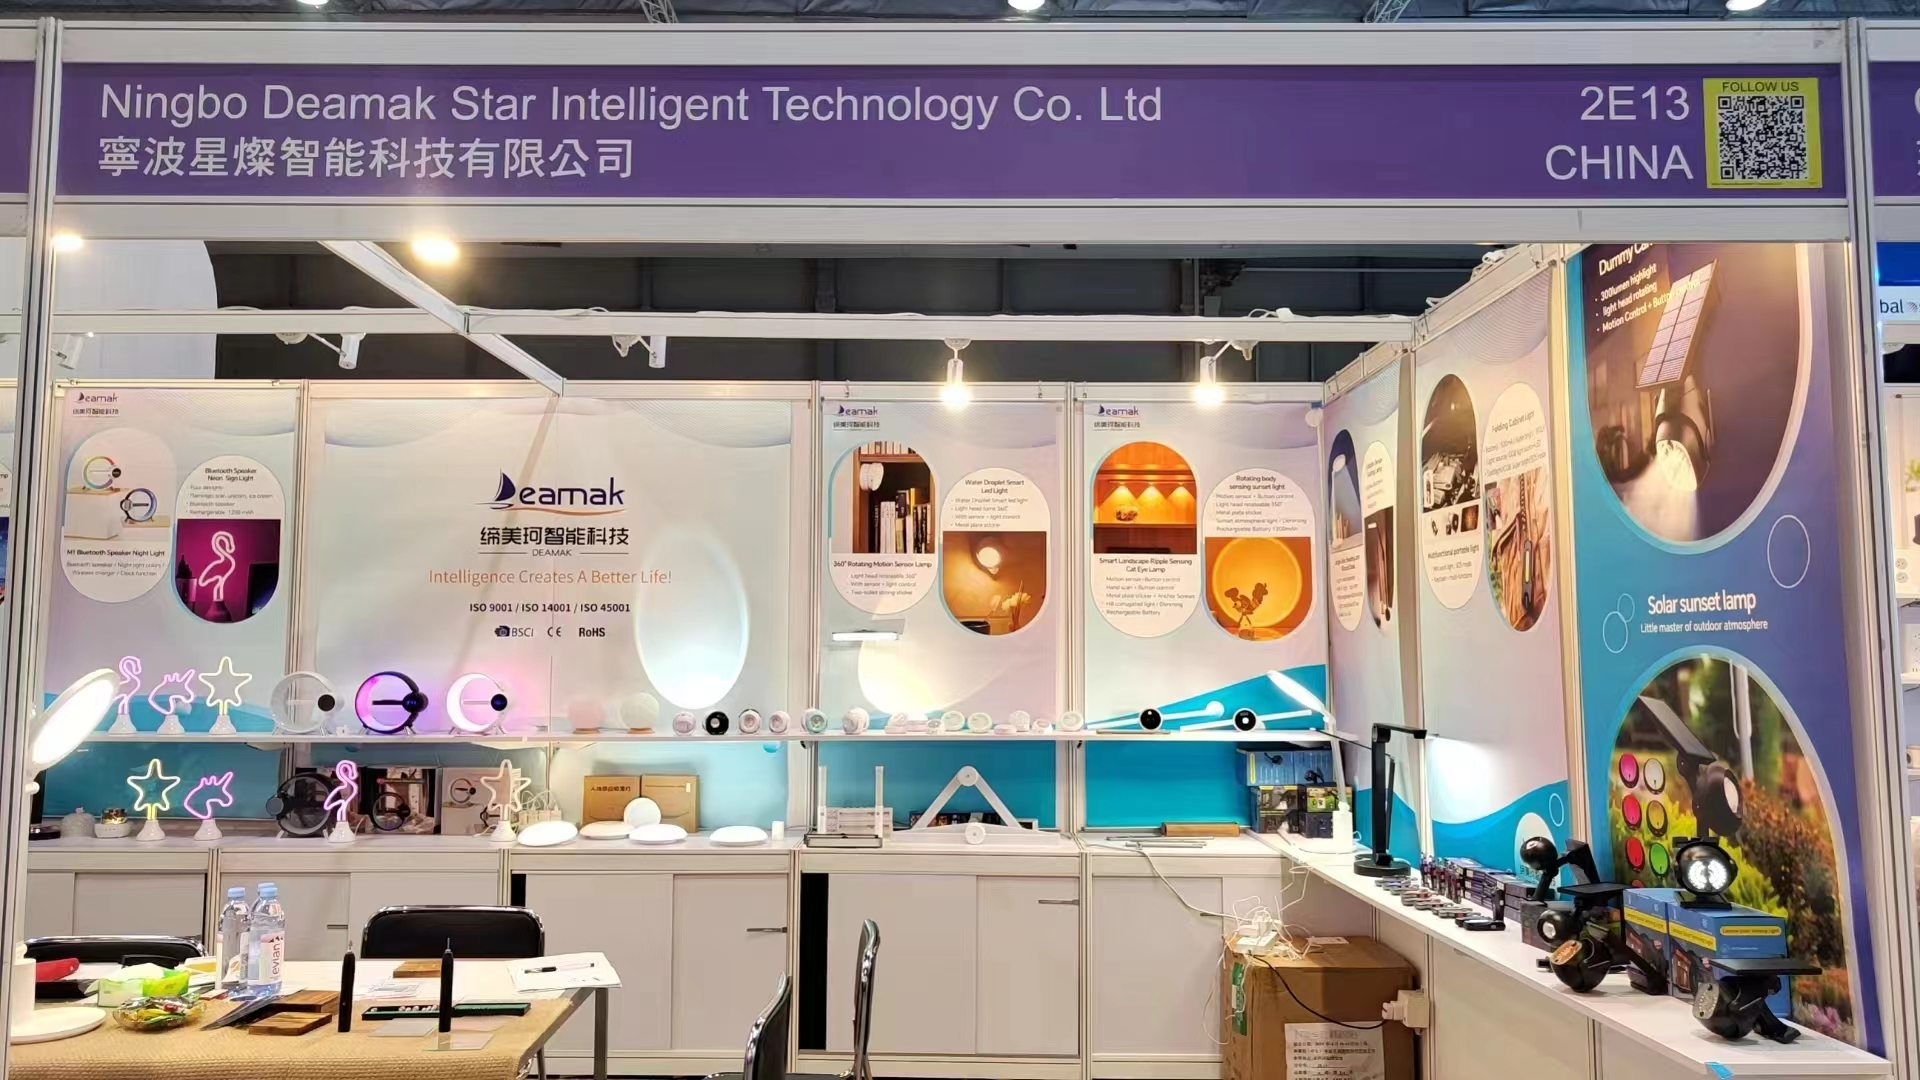 Ningbo Dimac shines at Global Sources Consumer Electronics Show